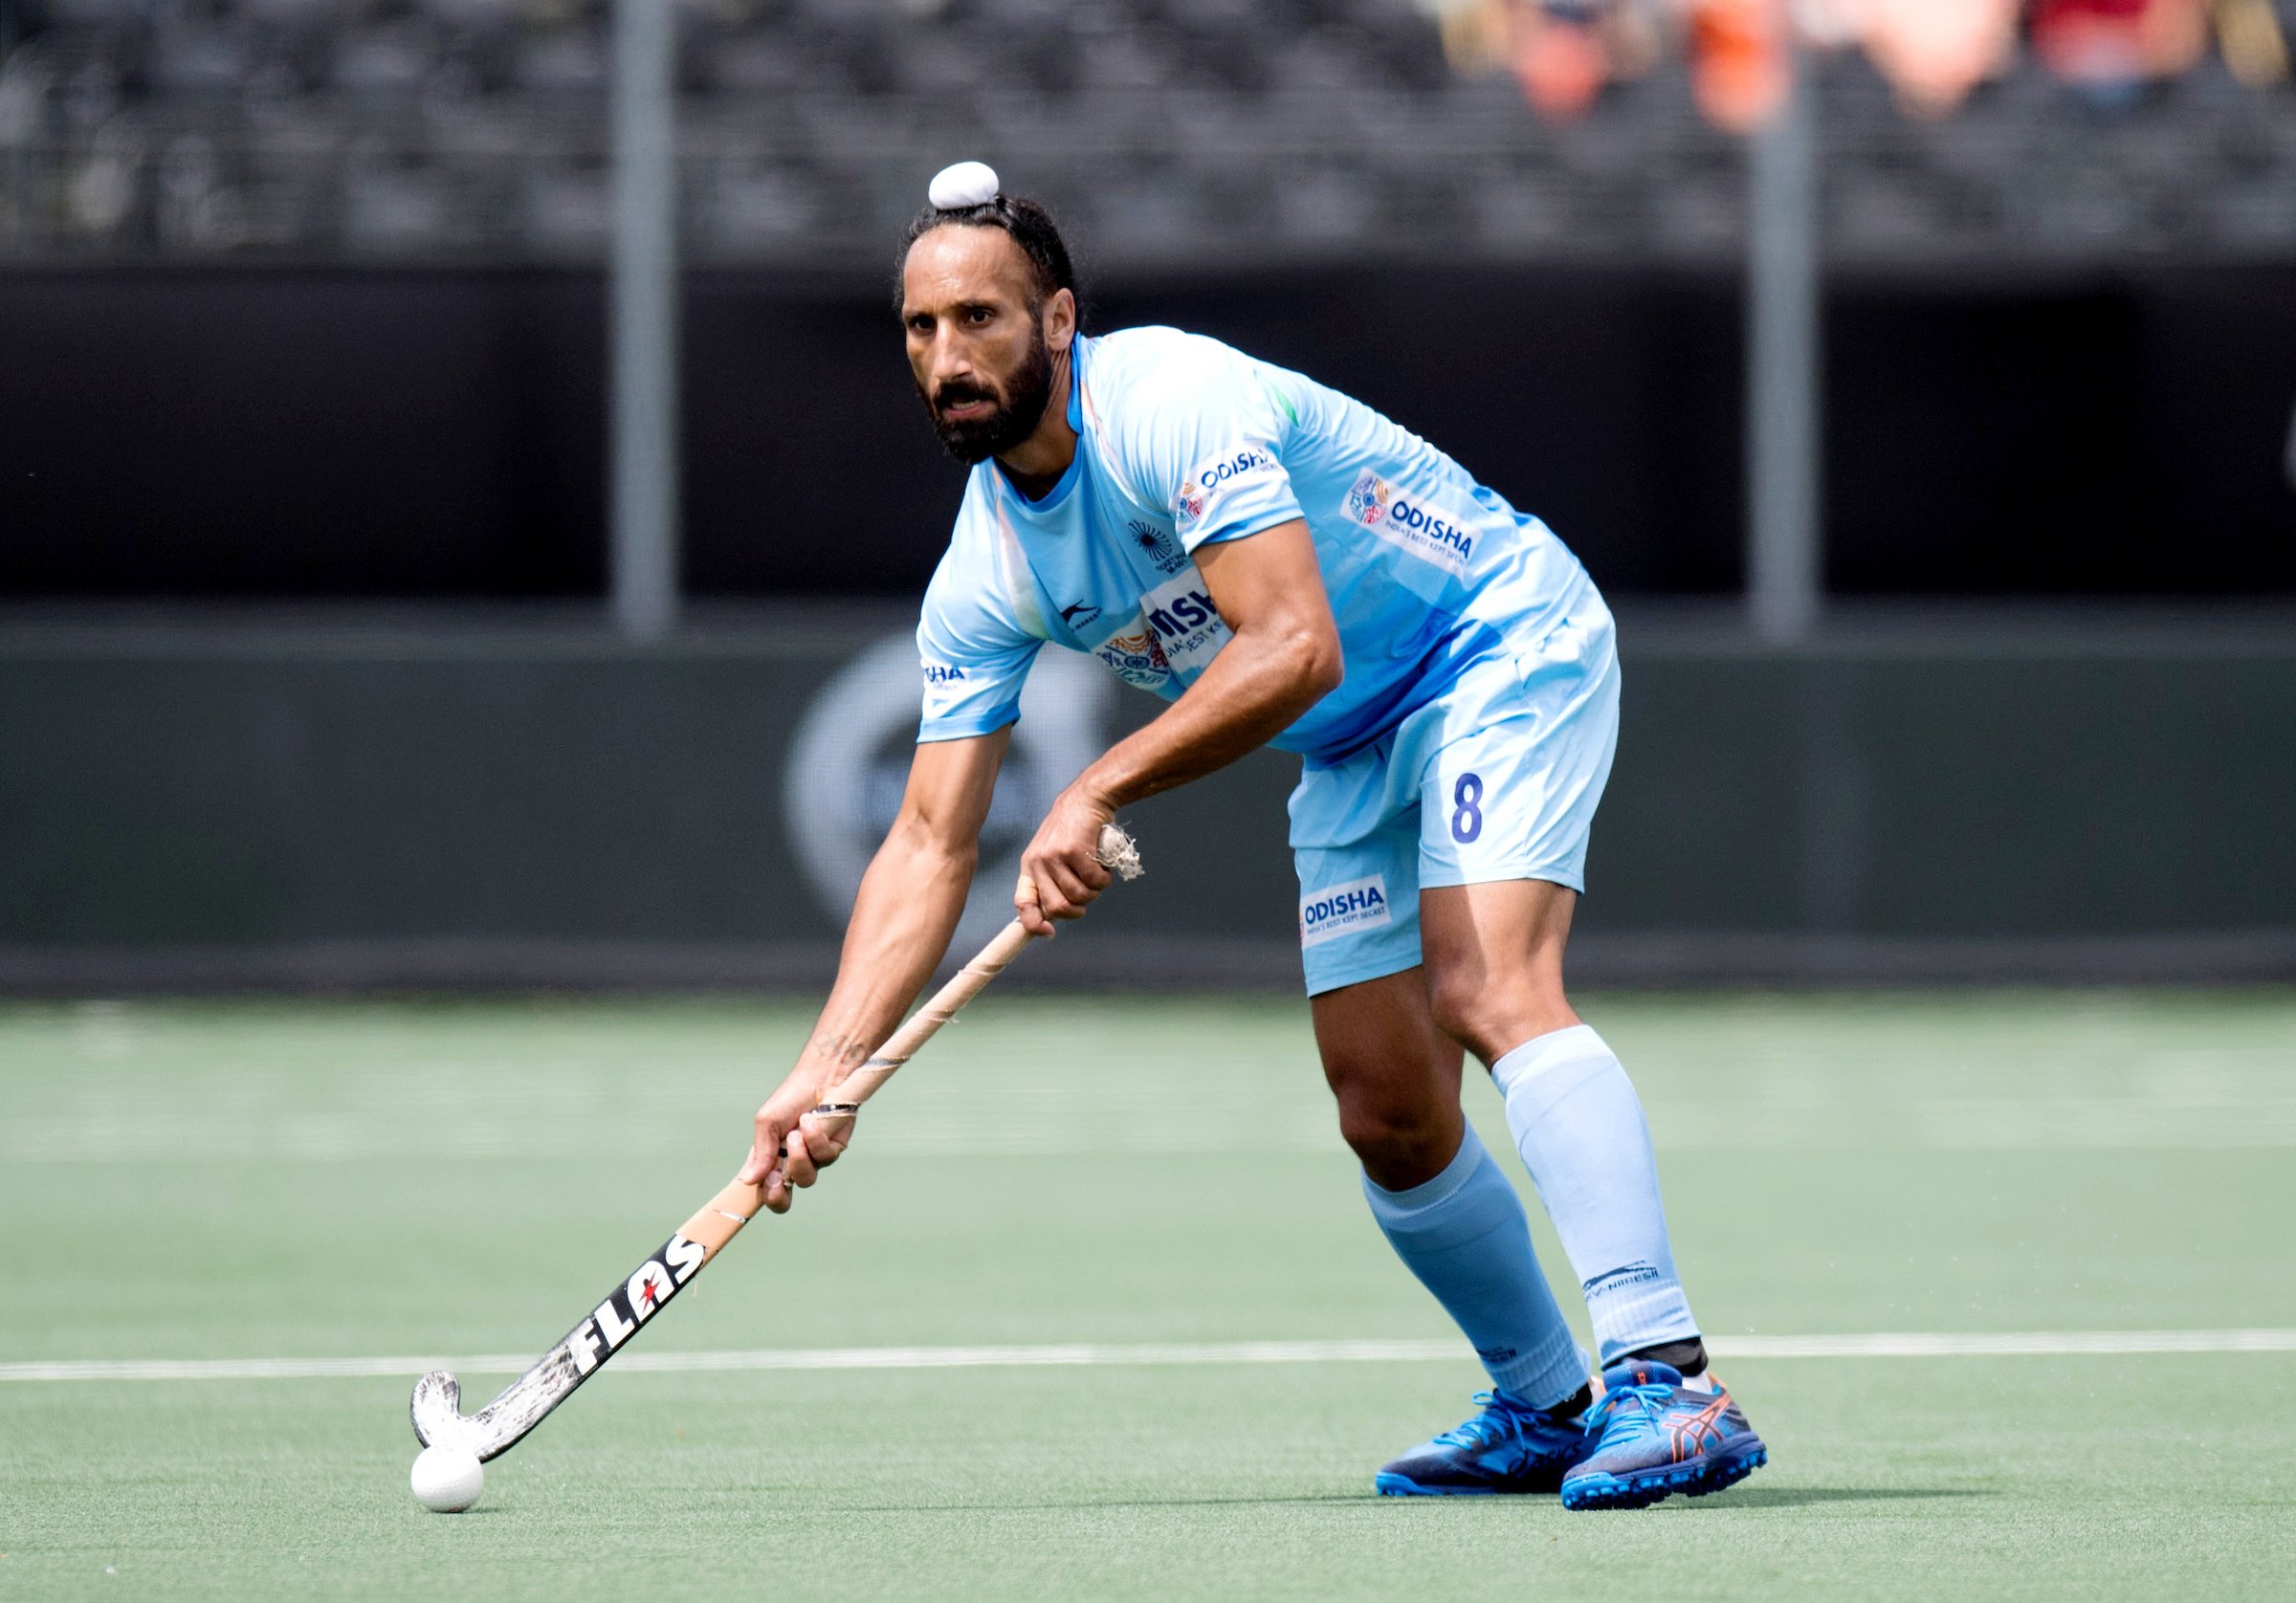  India’s ‘A’ men’s hockey team will be coached by Sardar Singh